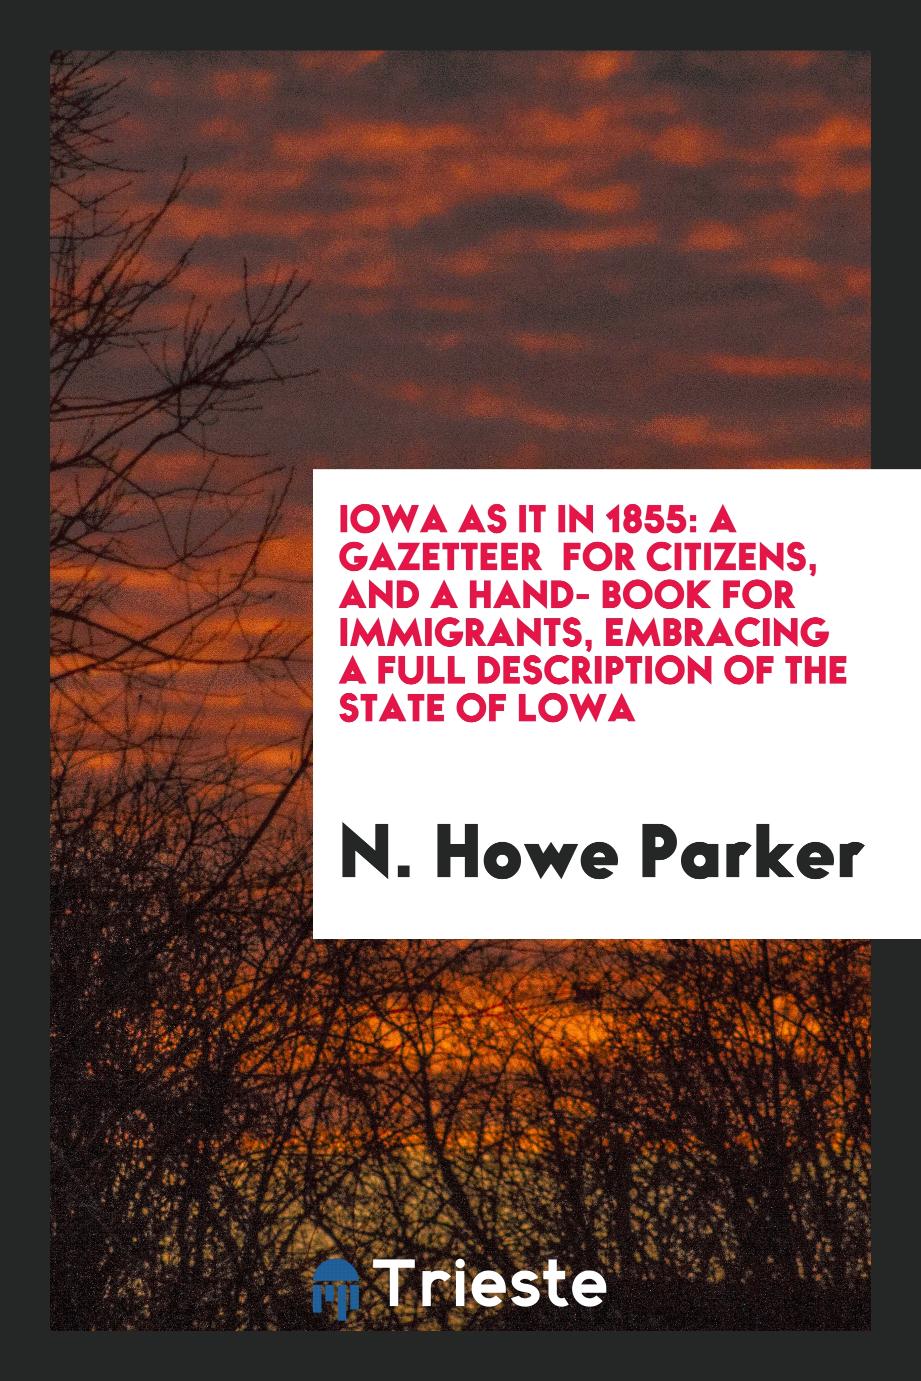 Iowa as it in 1855: a gazetteer for citizens, and a hand- book for immigrants, embracing a full description of the state of lowa